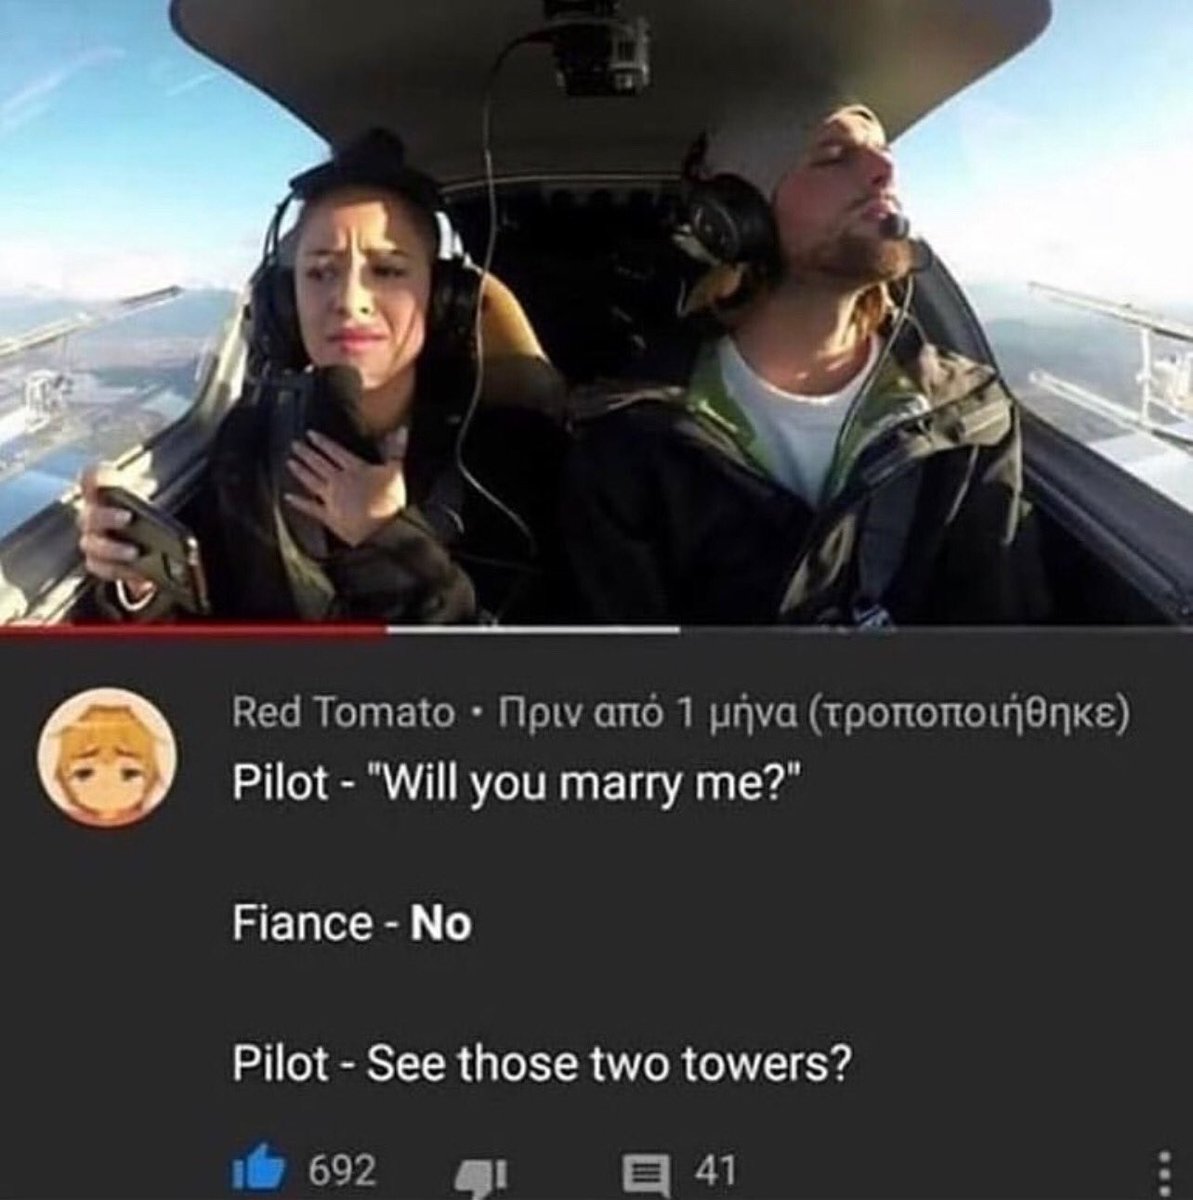 insane youtube comments - will you marry me no meme - Red Tomato 1 Pilot "Will you marry me?" Fiance No Pilot See those two towers? 692 41